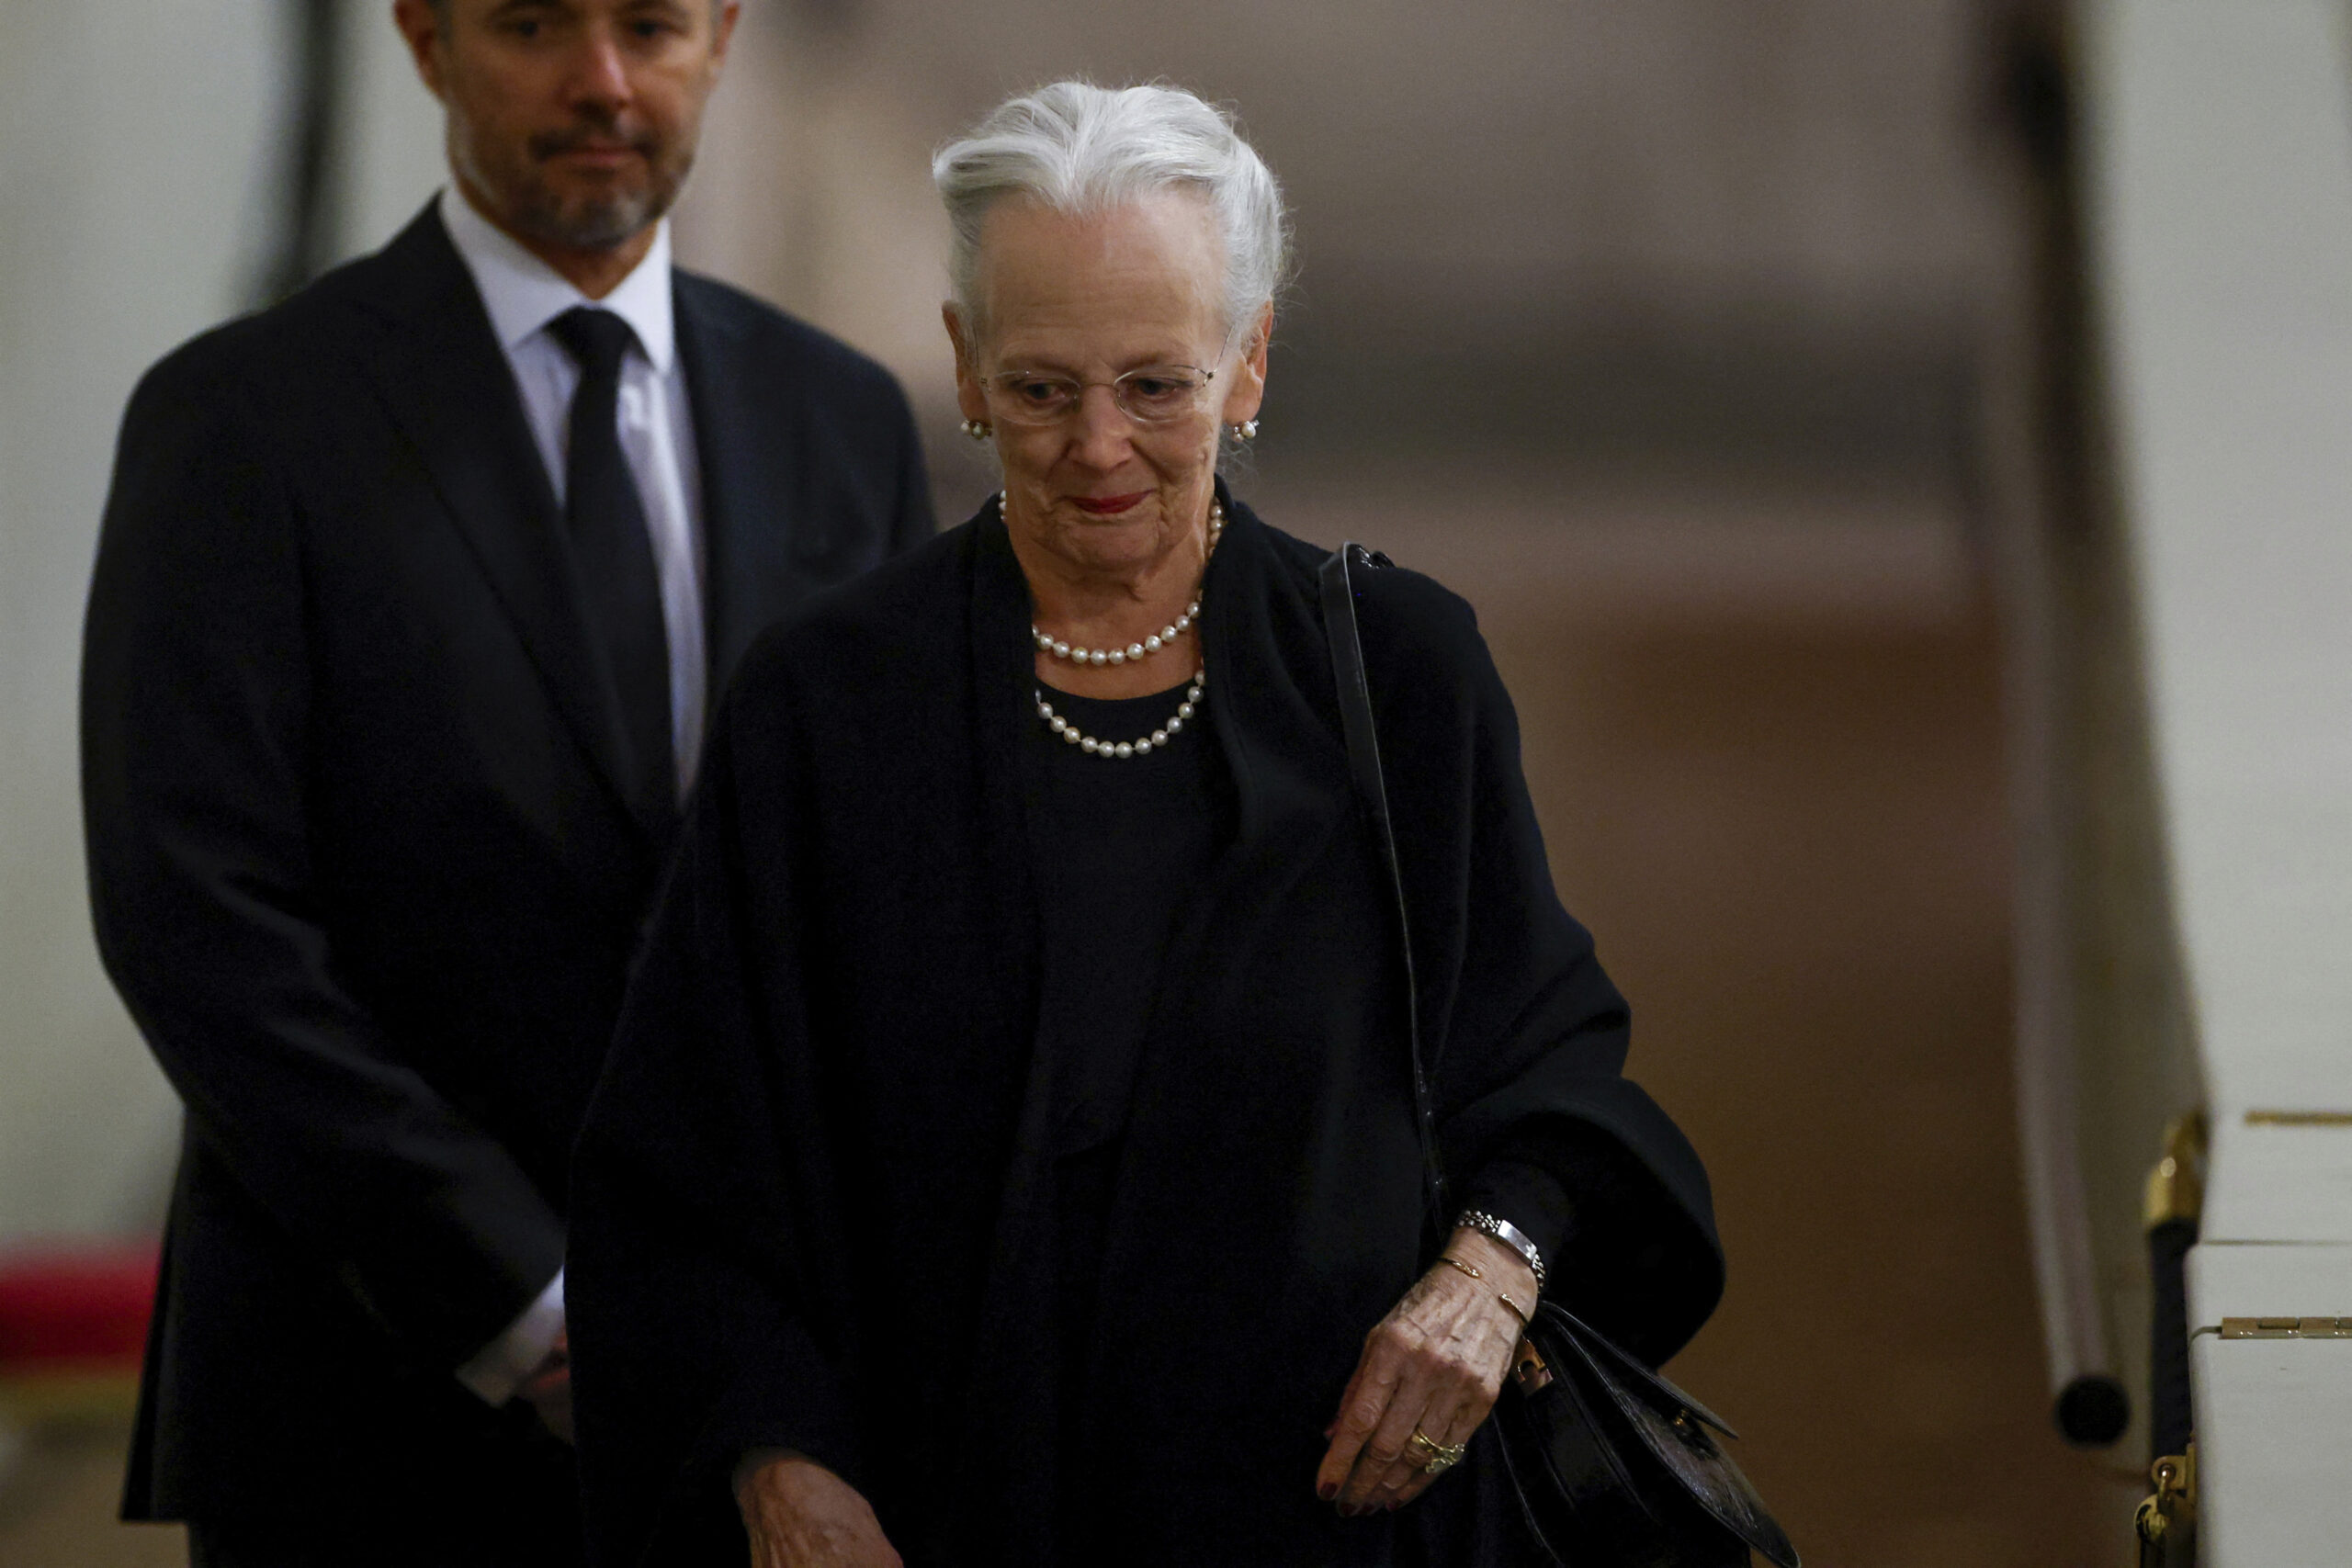 FILE - Denmark's Queen Margrethe pays her respect to the coffin of Britain's Queen Elizabeth, following her death, during her lying-in-state at Westminster Hall, in London, Sunday Sept. 18, 2022. Denmark’s Queen Margrethe II has tested positive for the coronavirus after attending the funeral of Britain’s Queen Elizabeth II. The Danish royal palace said Wednesday, Sept. 21, 2022 that the 82-year-old Margrethe canceled her official duties after the Tuesday night test. she previously tested positive for the virus in February. (John Sibley/Pool via AP, File)